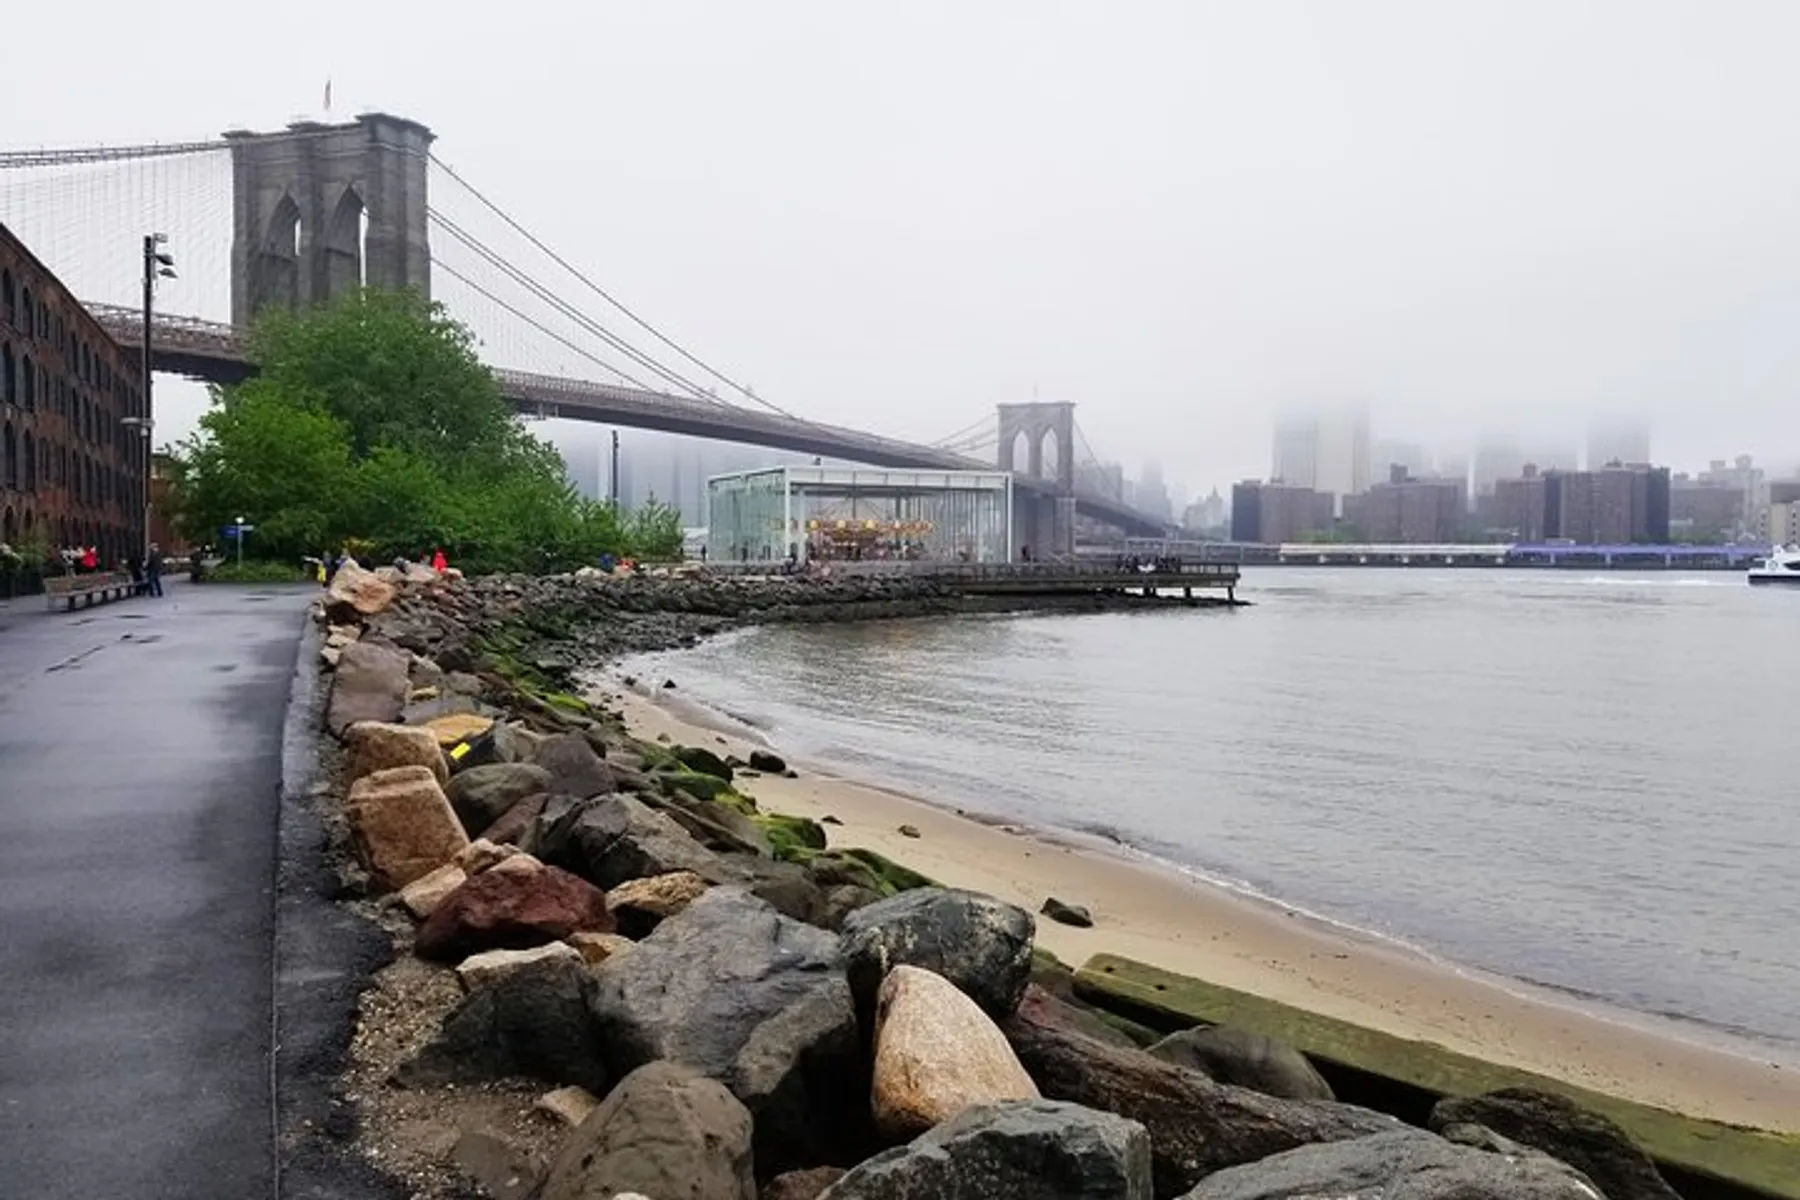 The image features the Brooklyn Bridge on a foggy day, with a view from the riverbank showcasing a carousel structure and the mist-obscured skyline of Manhattan in the background.